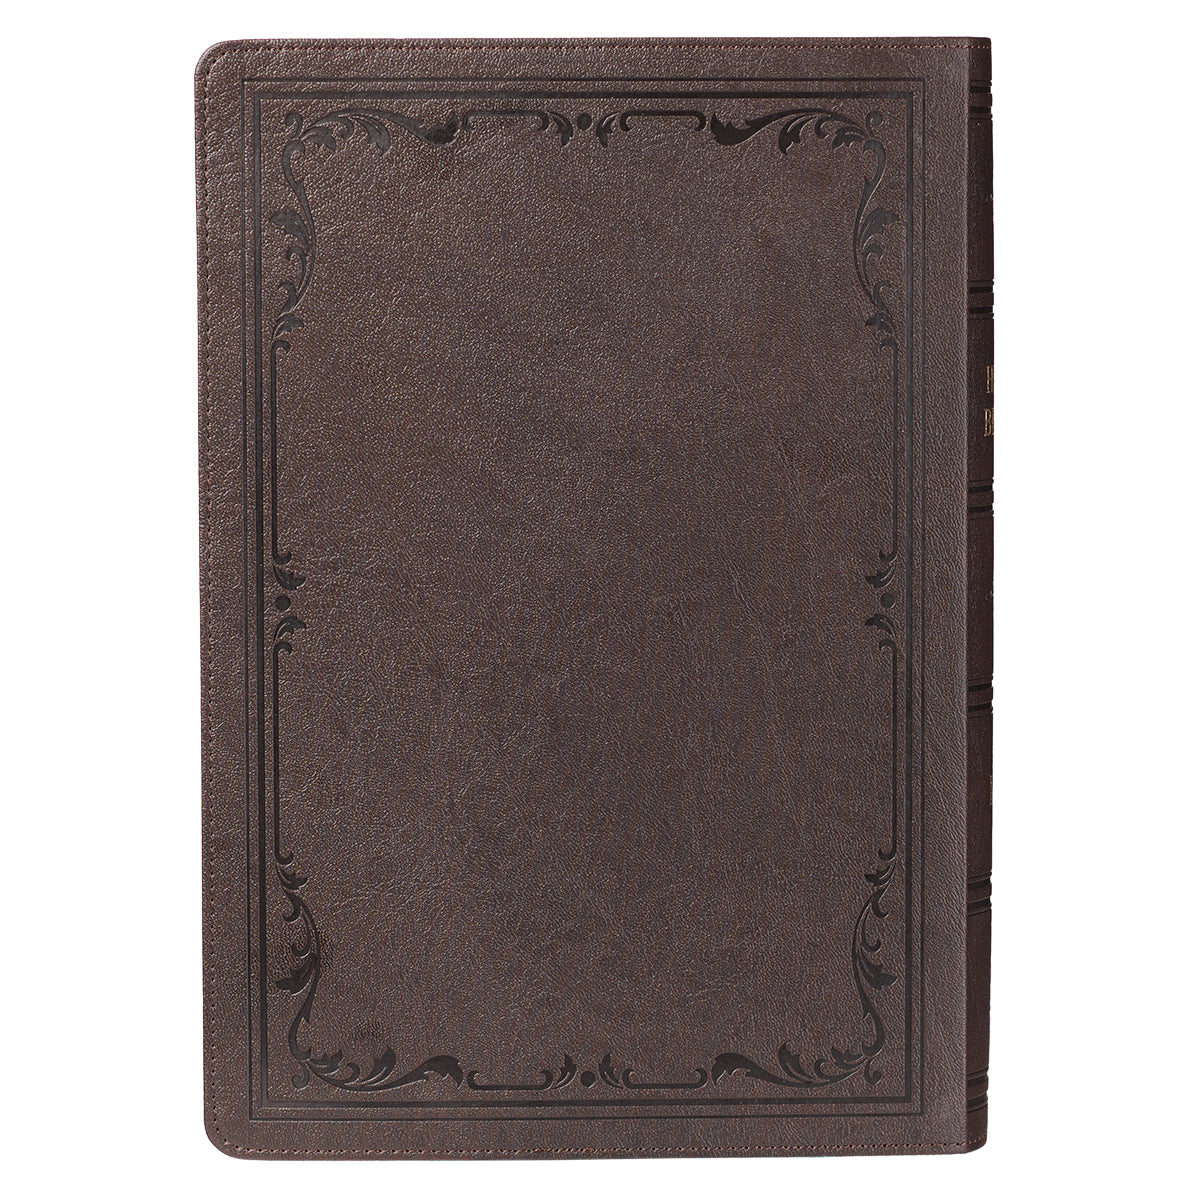 Image of KJV Super Giant Print Lux-Leather Brown other